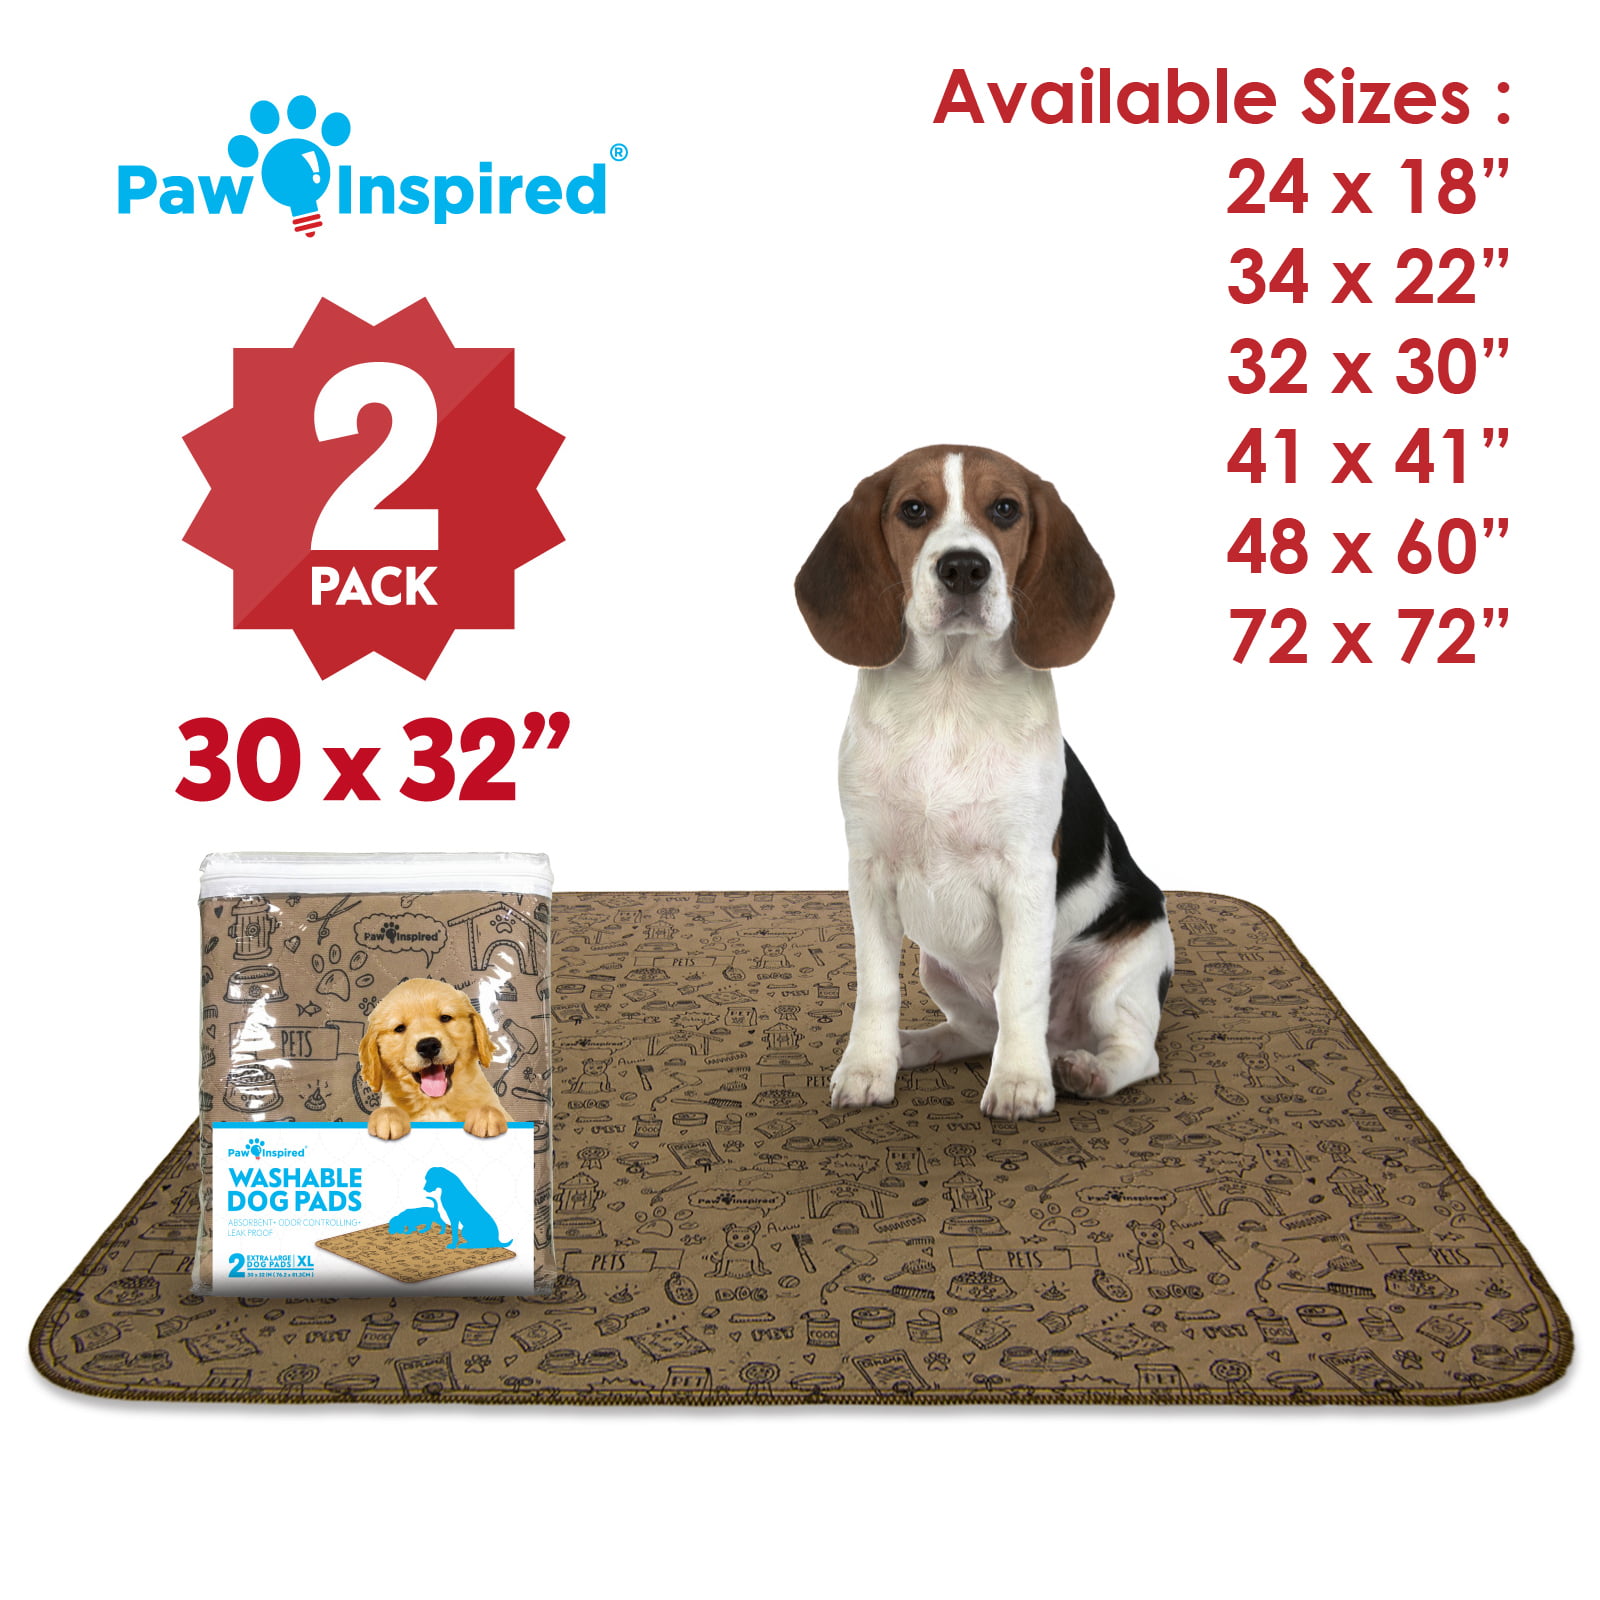 6 Dog Incontinence Pad Puppy Bed Training Pad Liner Mat Washable Not Disposable 